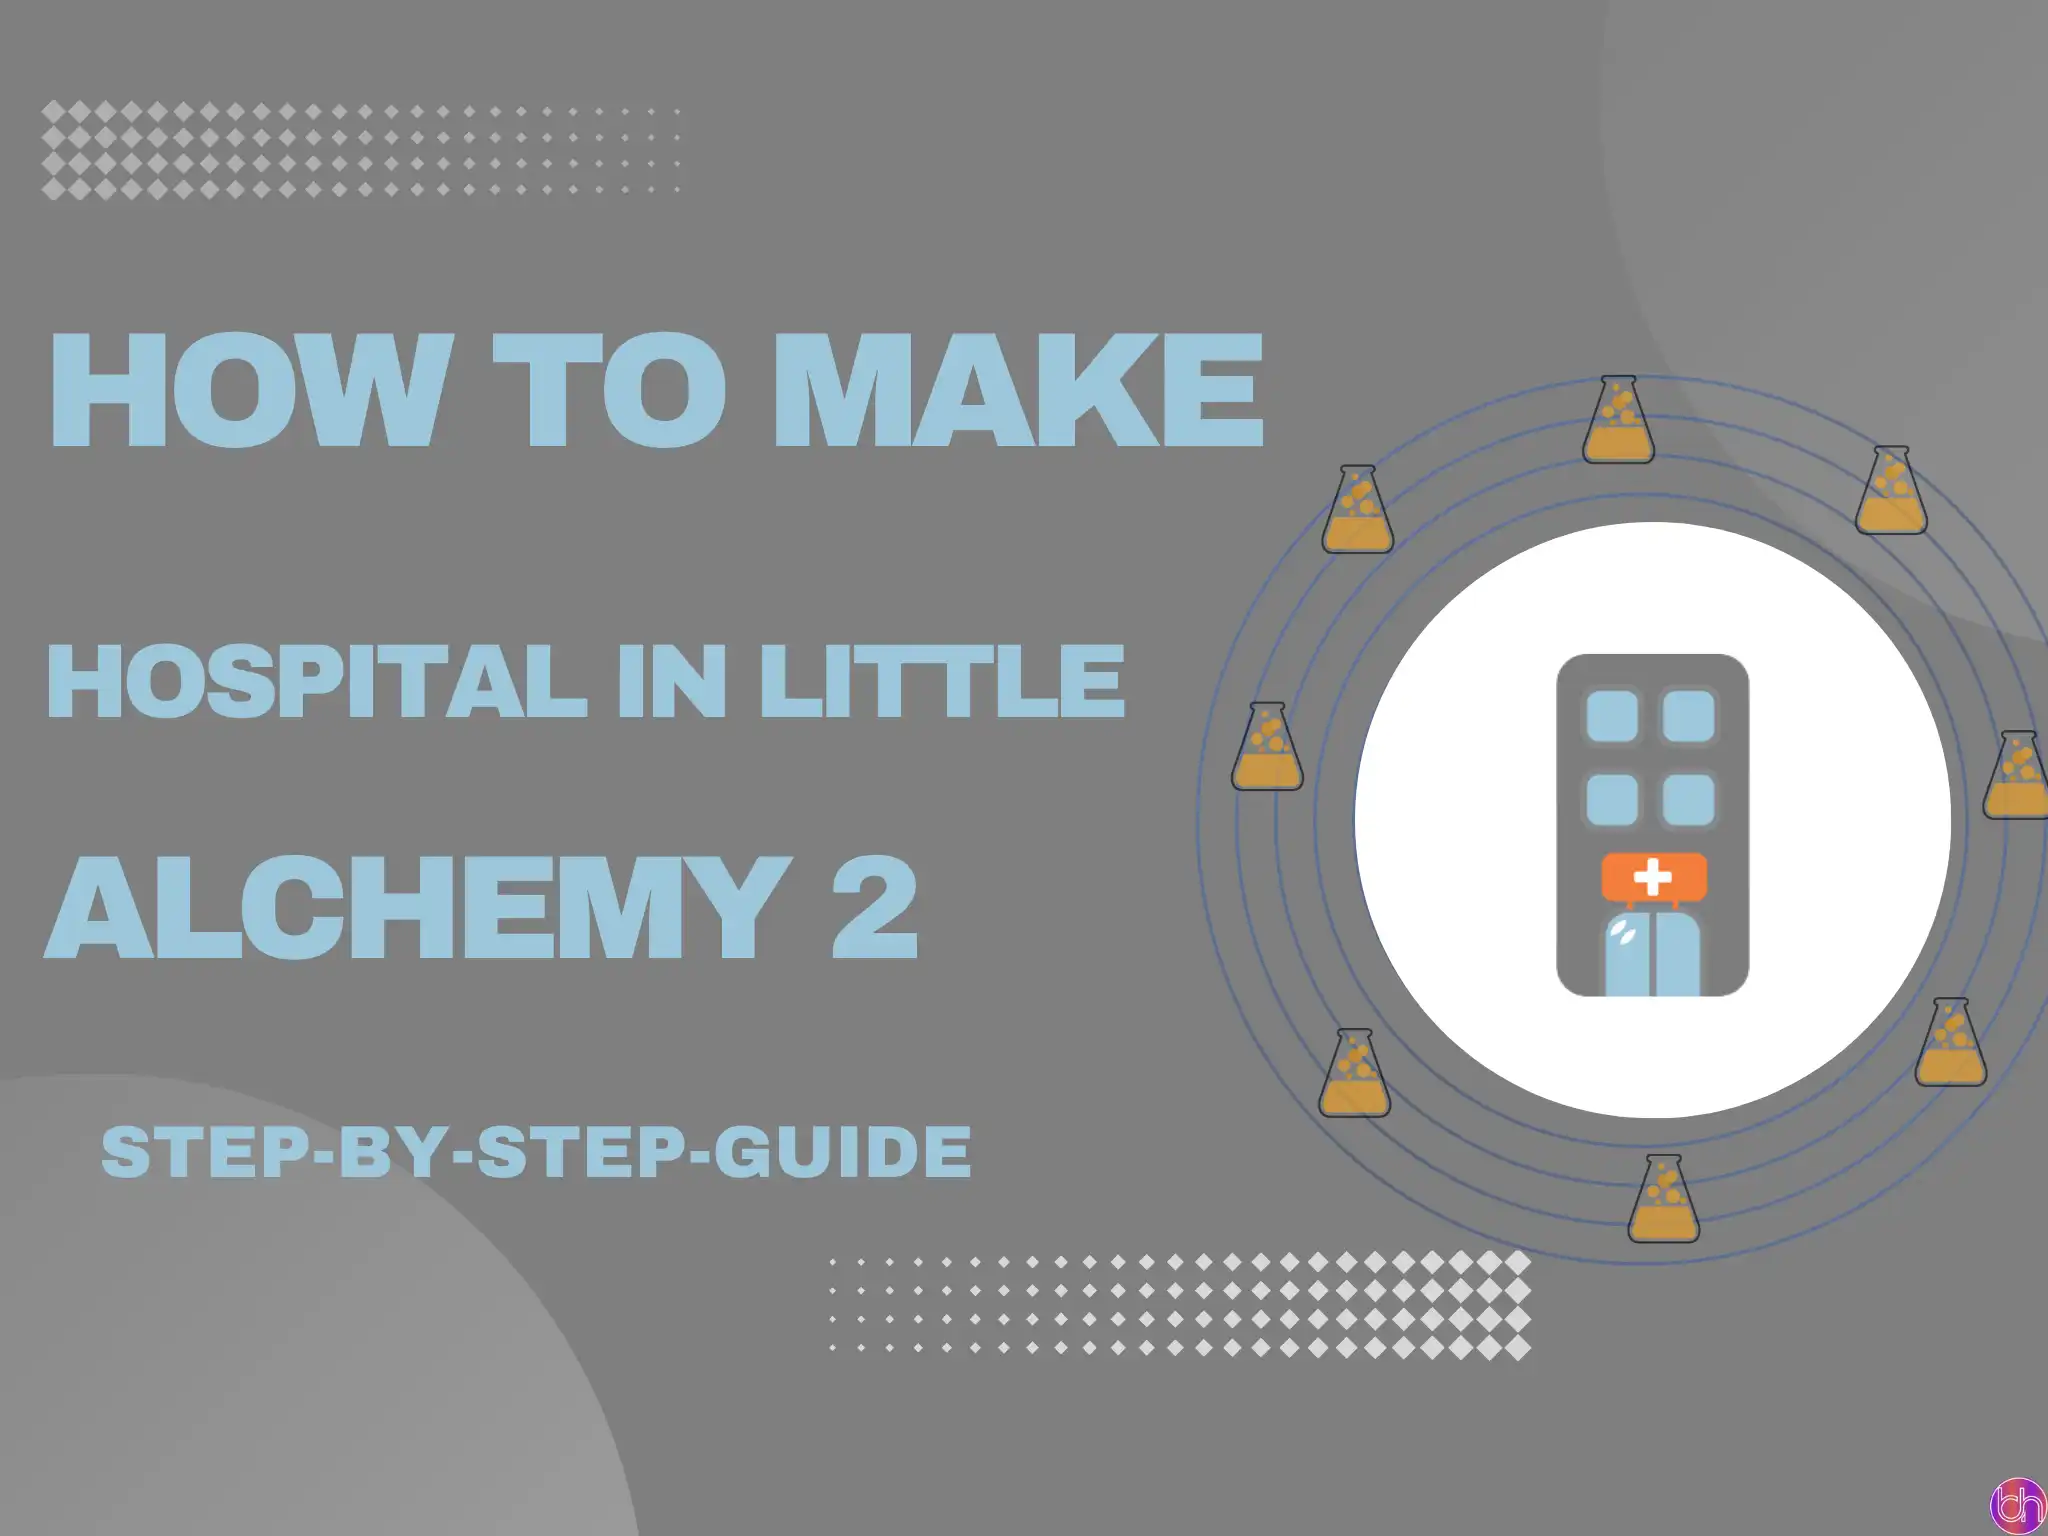 How to make Hospital in Little Alchemy 2